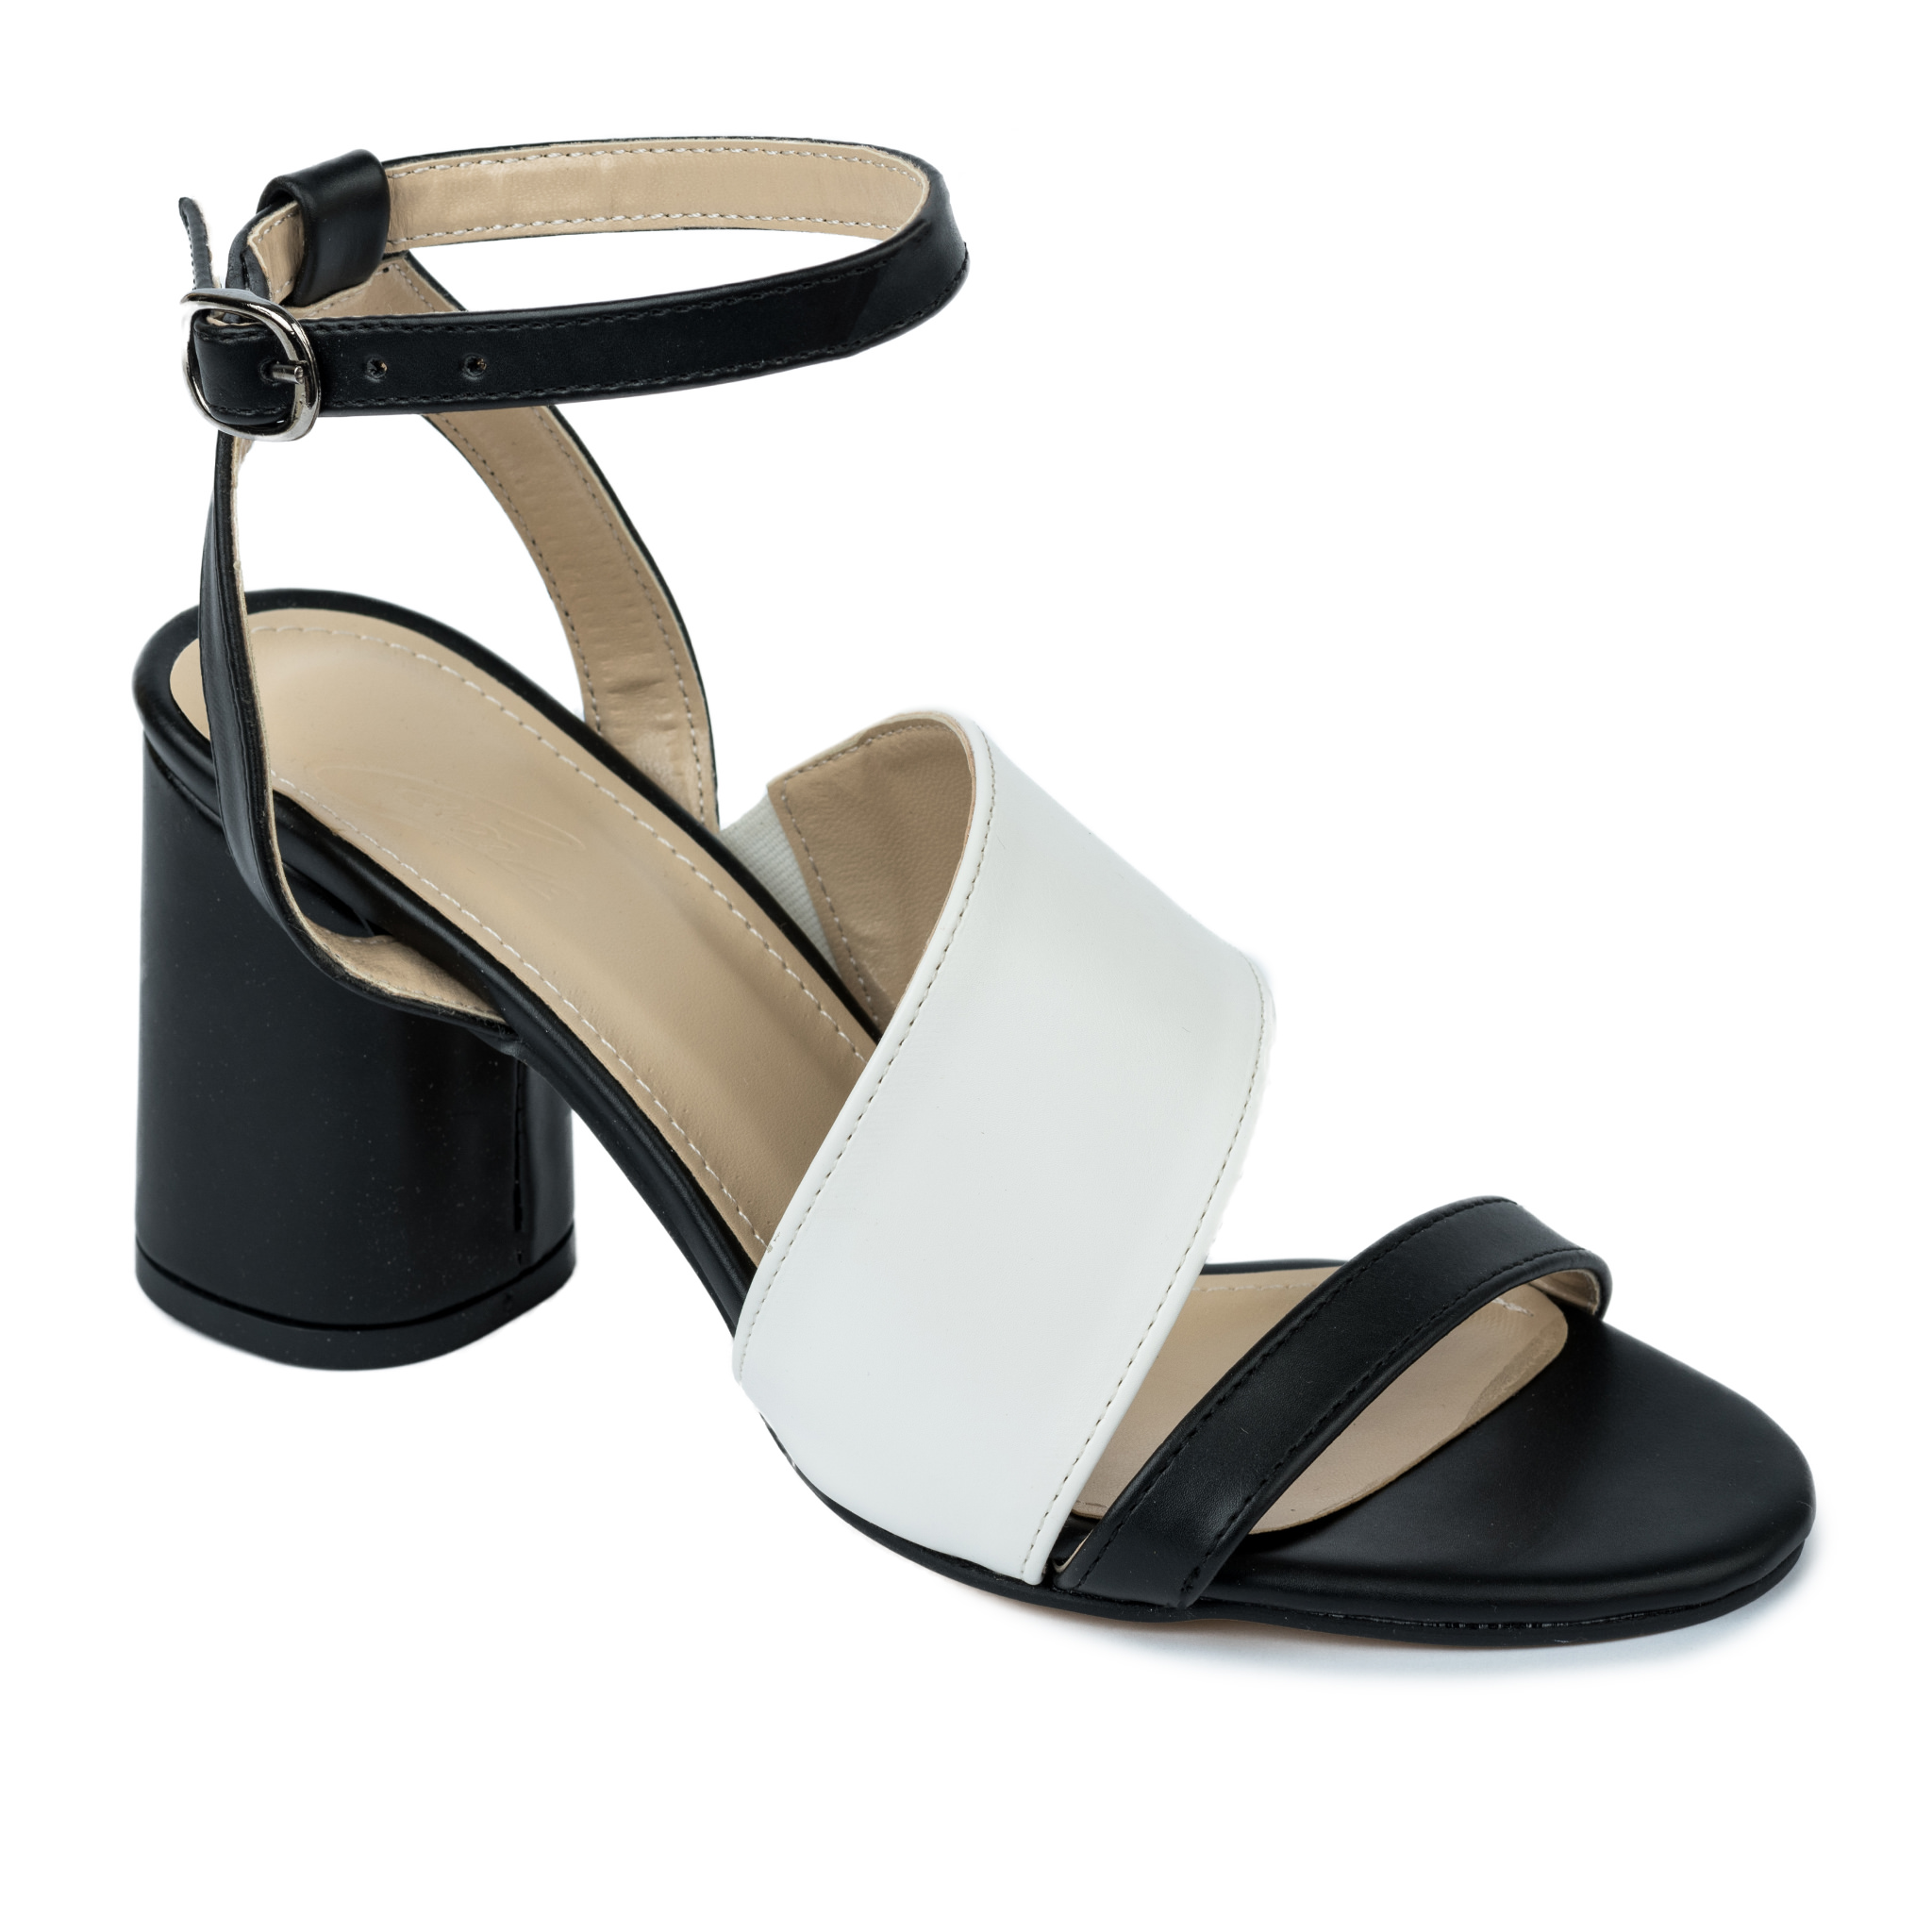 THICK HEEL SANDALS WITH BELTS - WHITE/BLACK